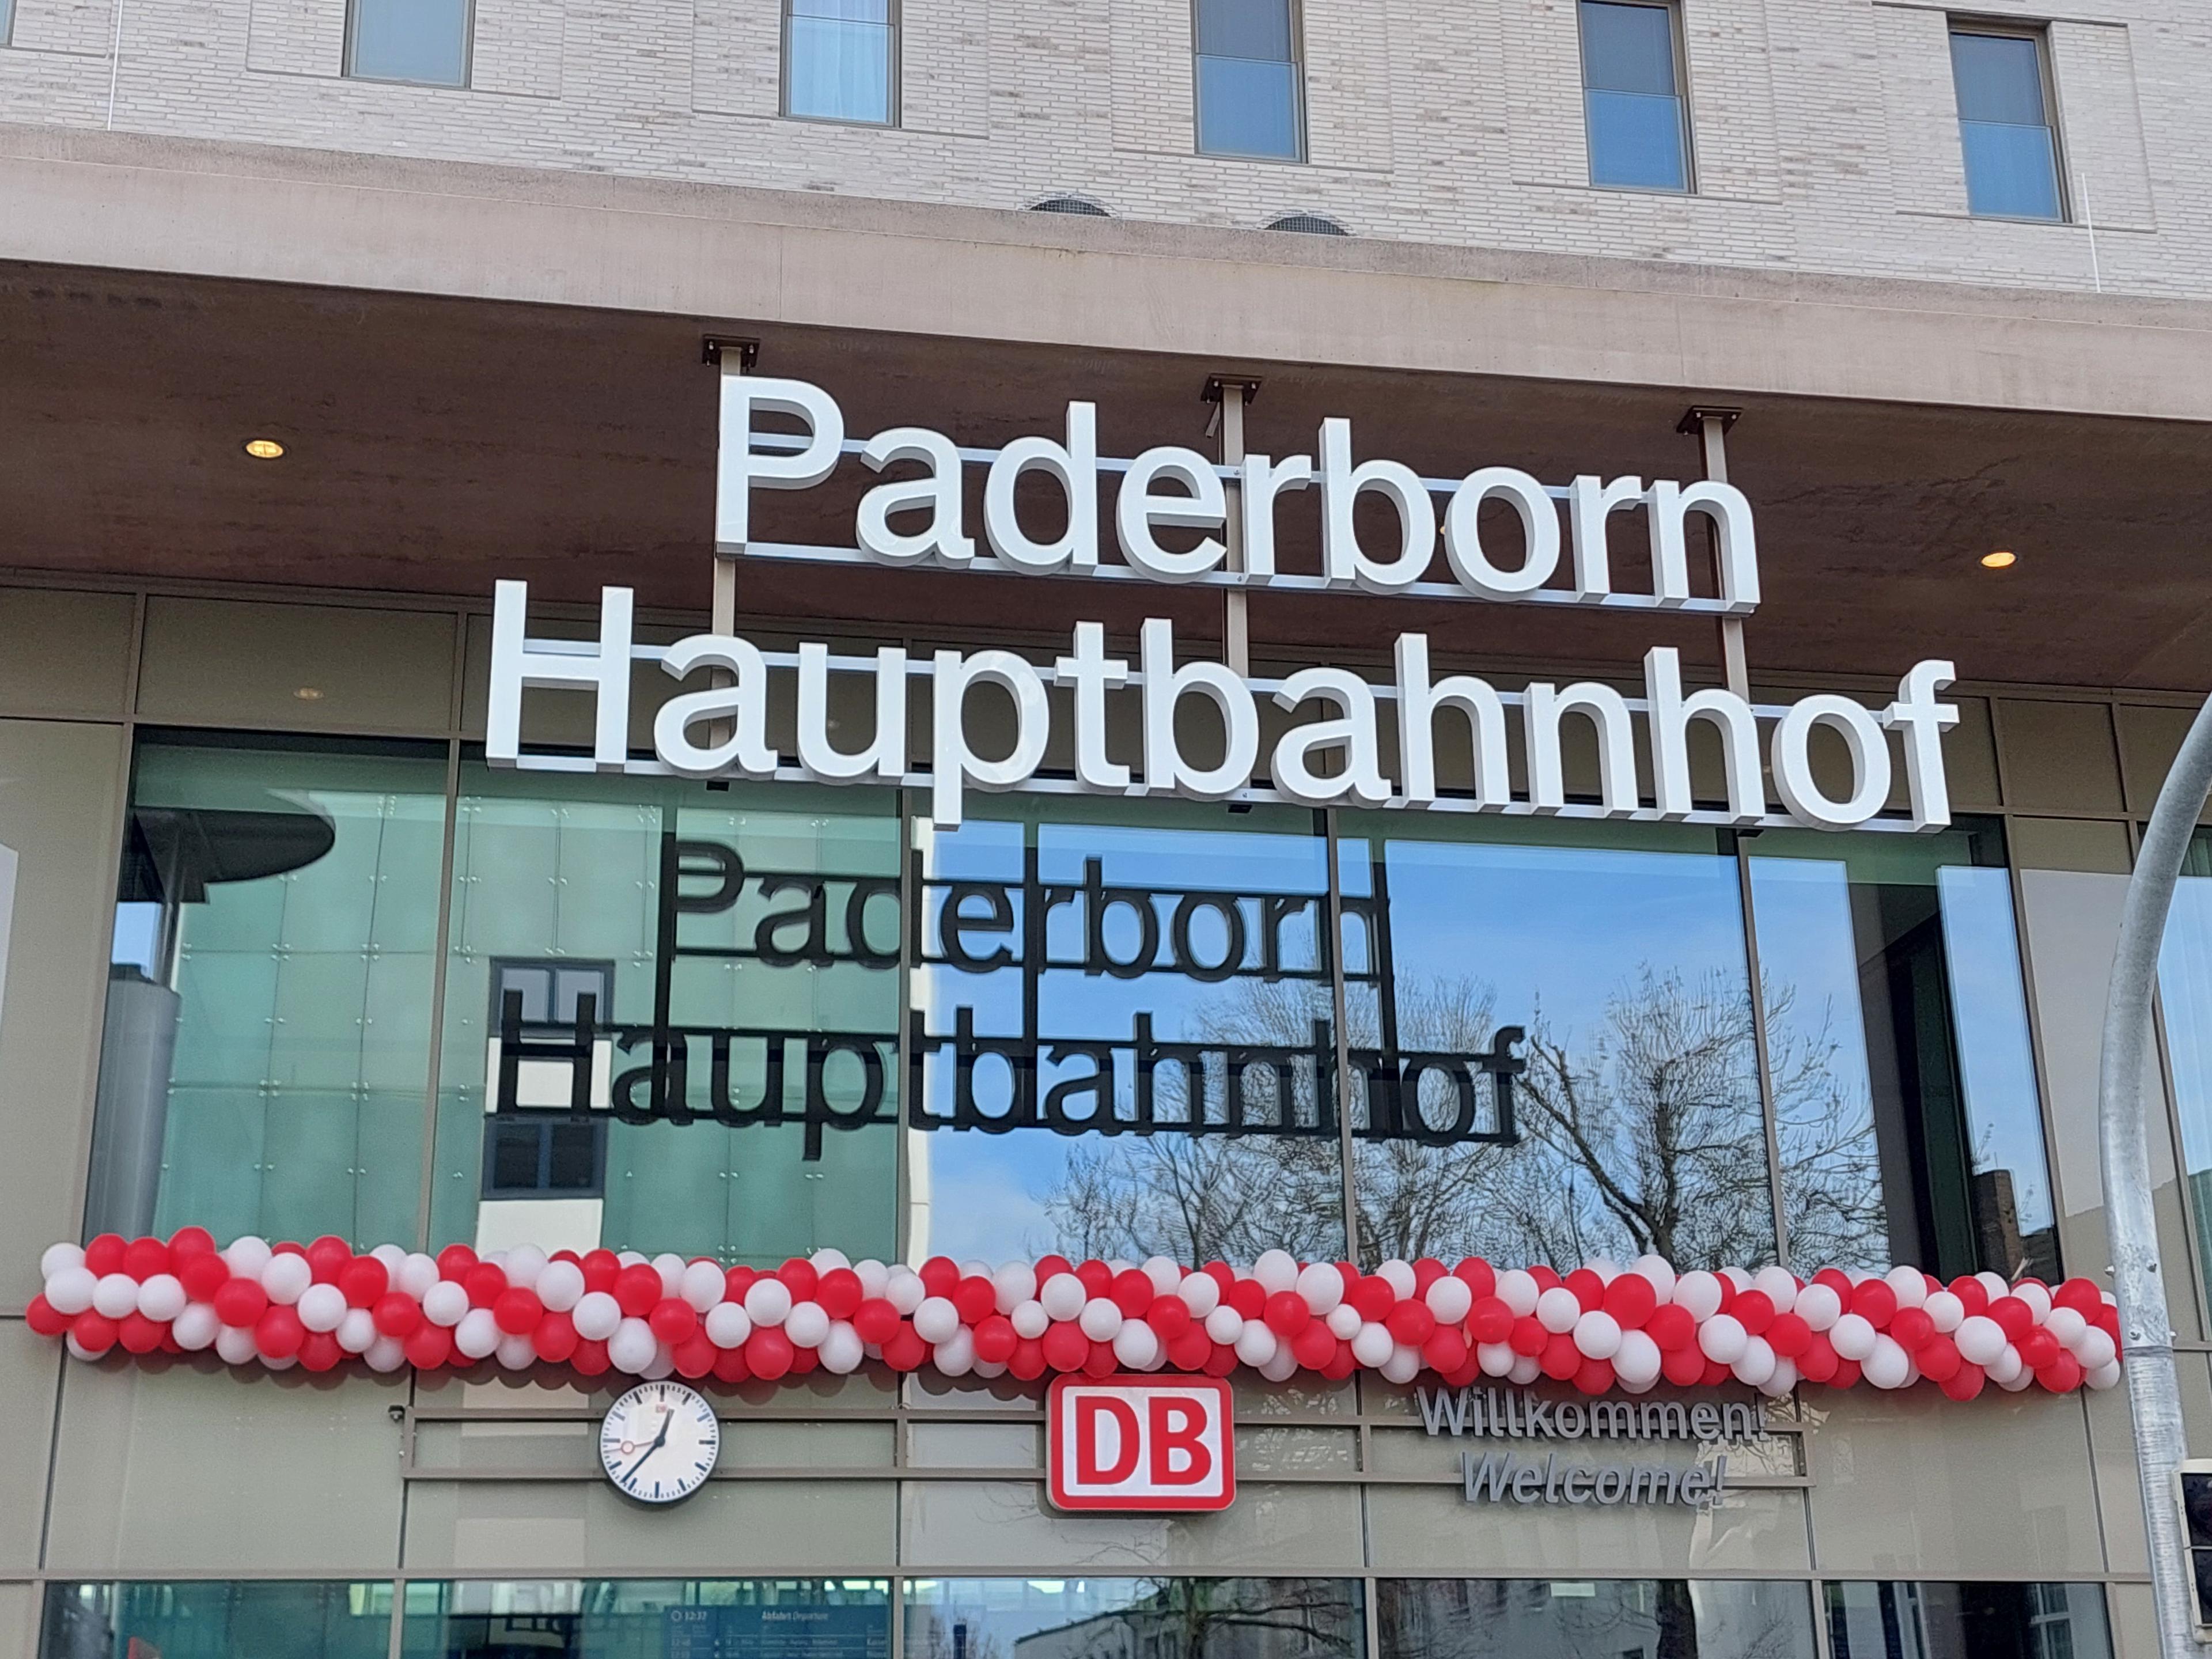 The exterior of Paderborn Hauptbahnhof decorated with white and red balloons.